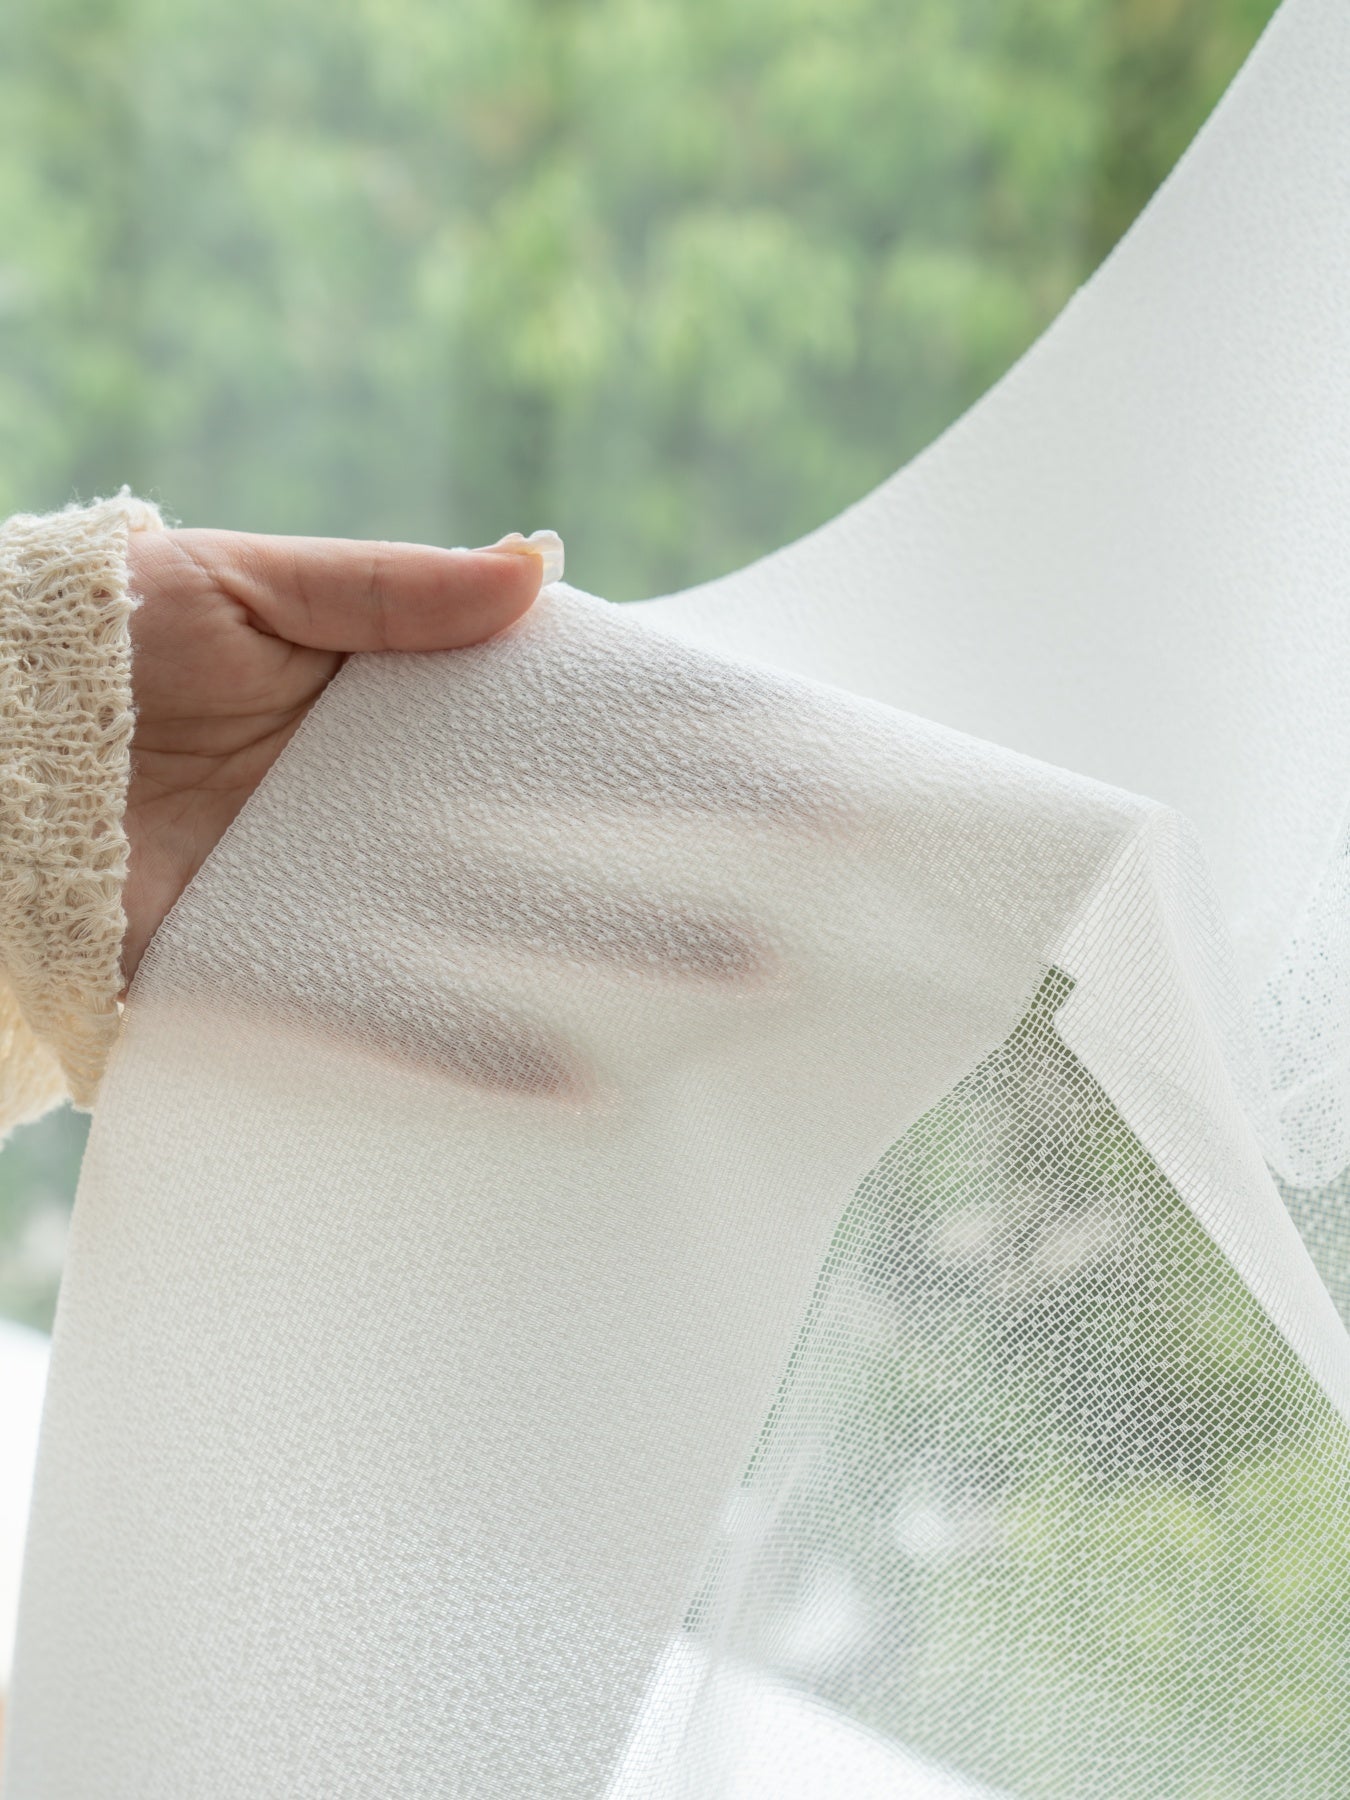 Close-up of hand holding textured semi-transparent curtain by window, showcasing stain-resistant and moisture-resistant features for dreamy elegance.